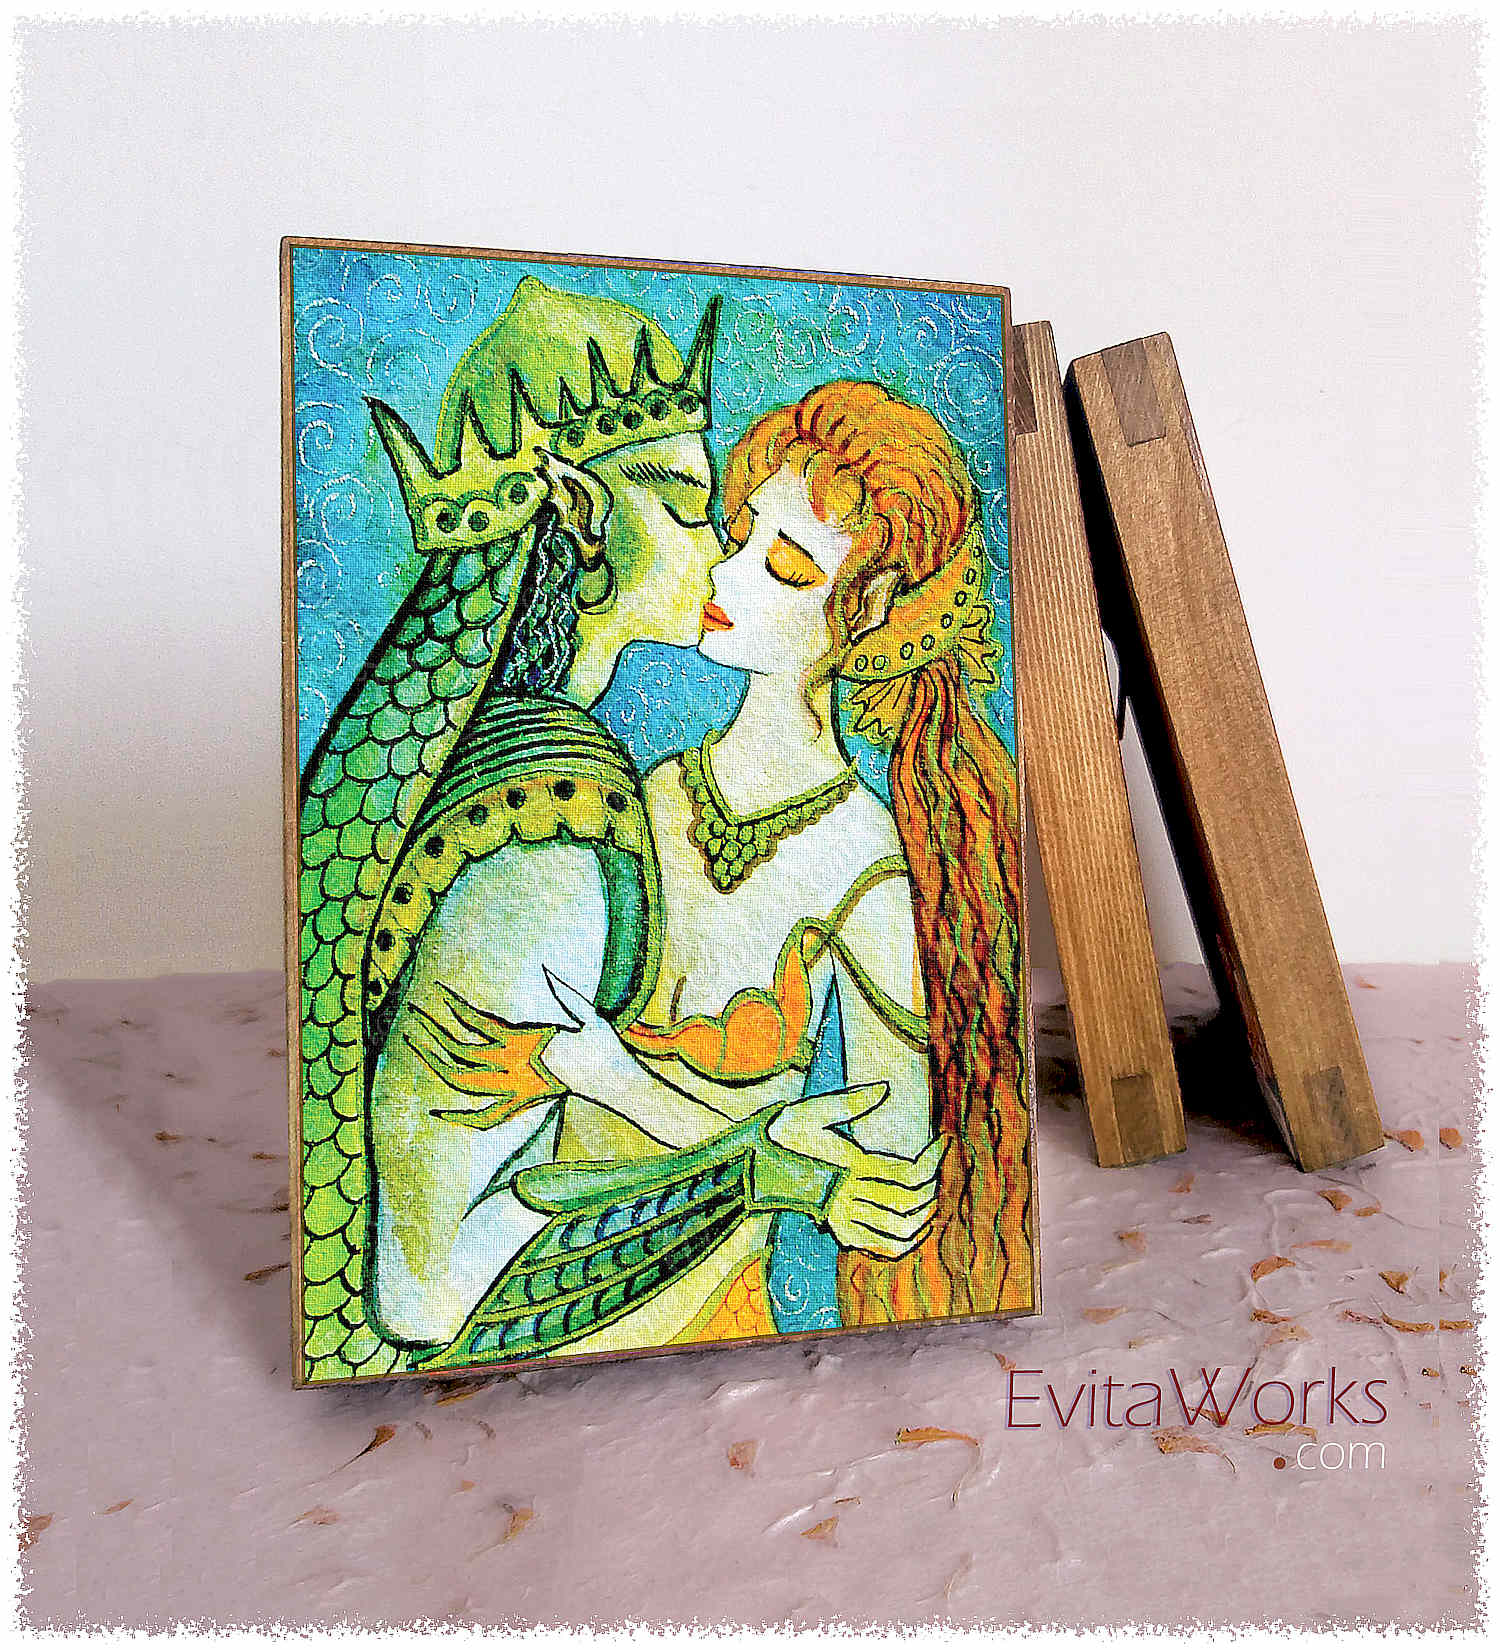 Hit to learn about "Mermaid 49, beautiful female creature, couple art" on woodblocks